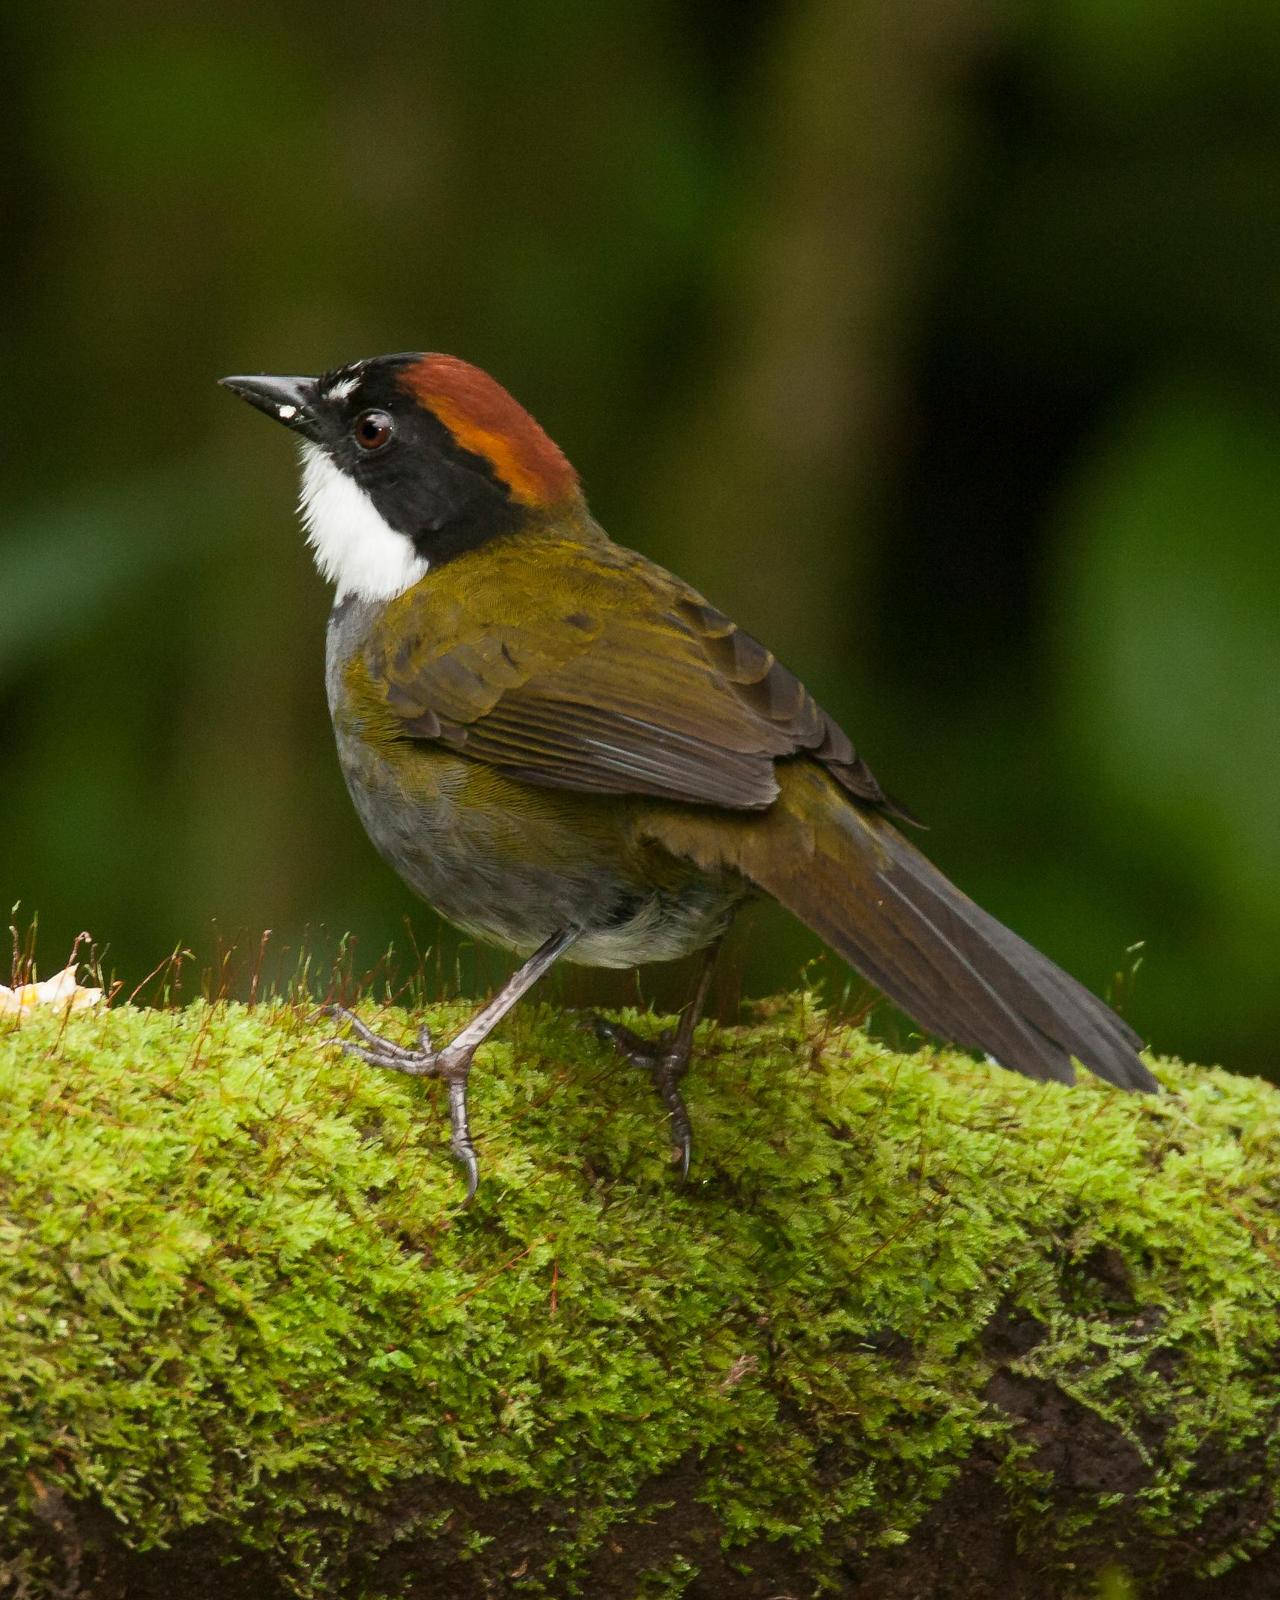 Chestnut-capped Brushfinch Photo by Robert Lewis